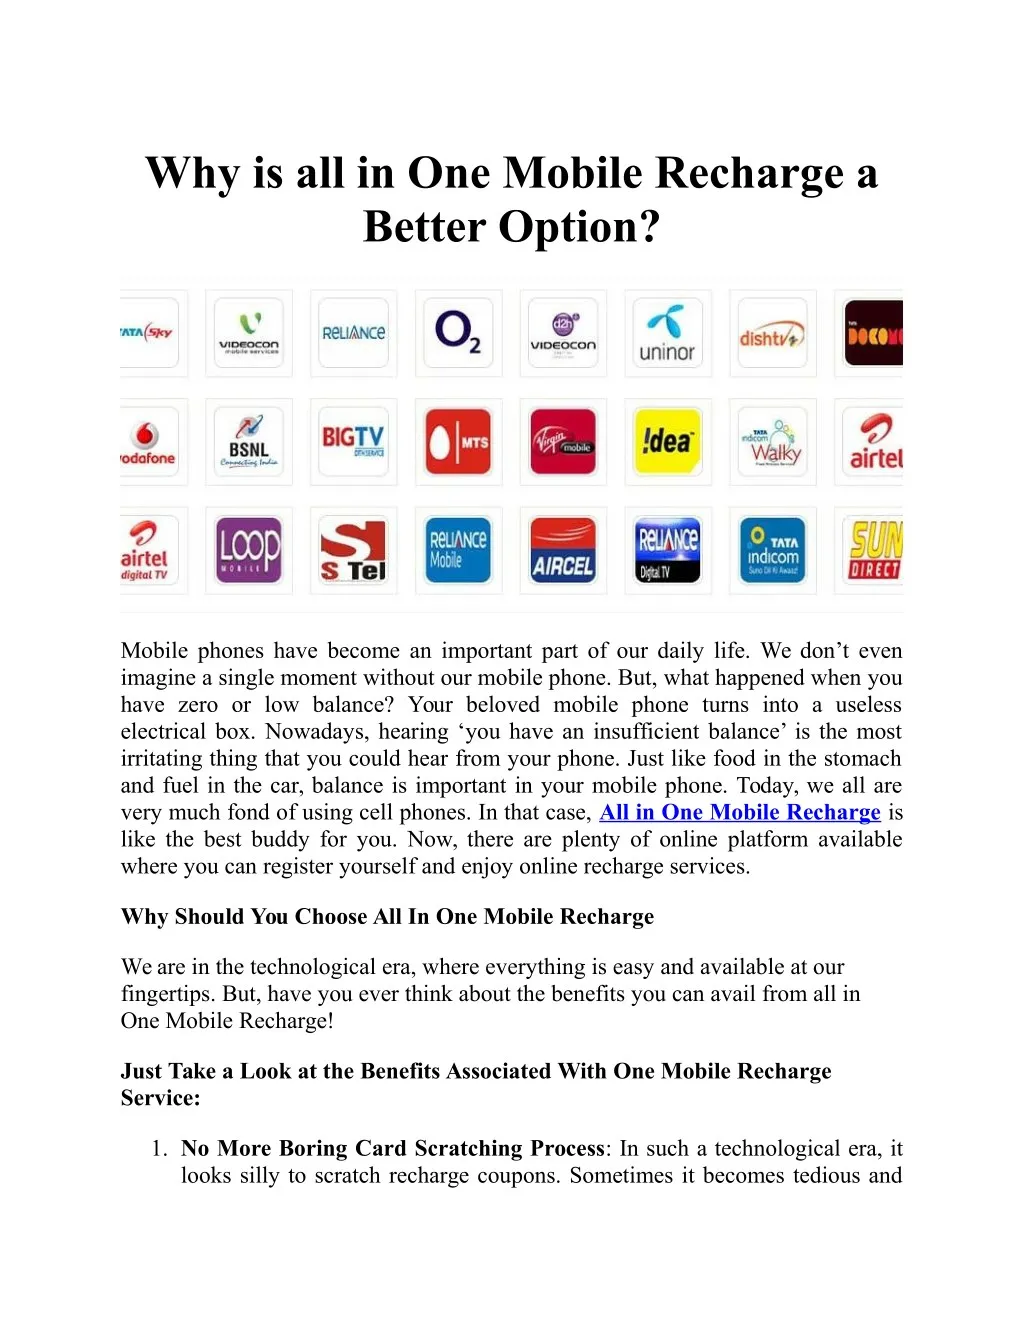 why is all in one mobile recharge a better option